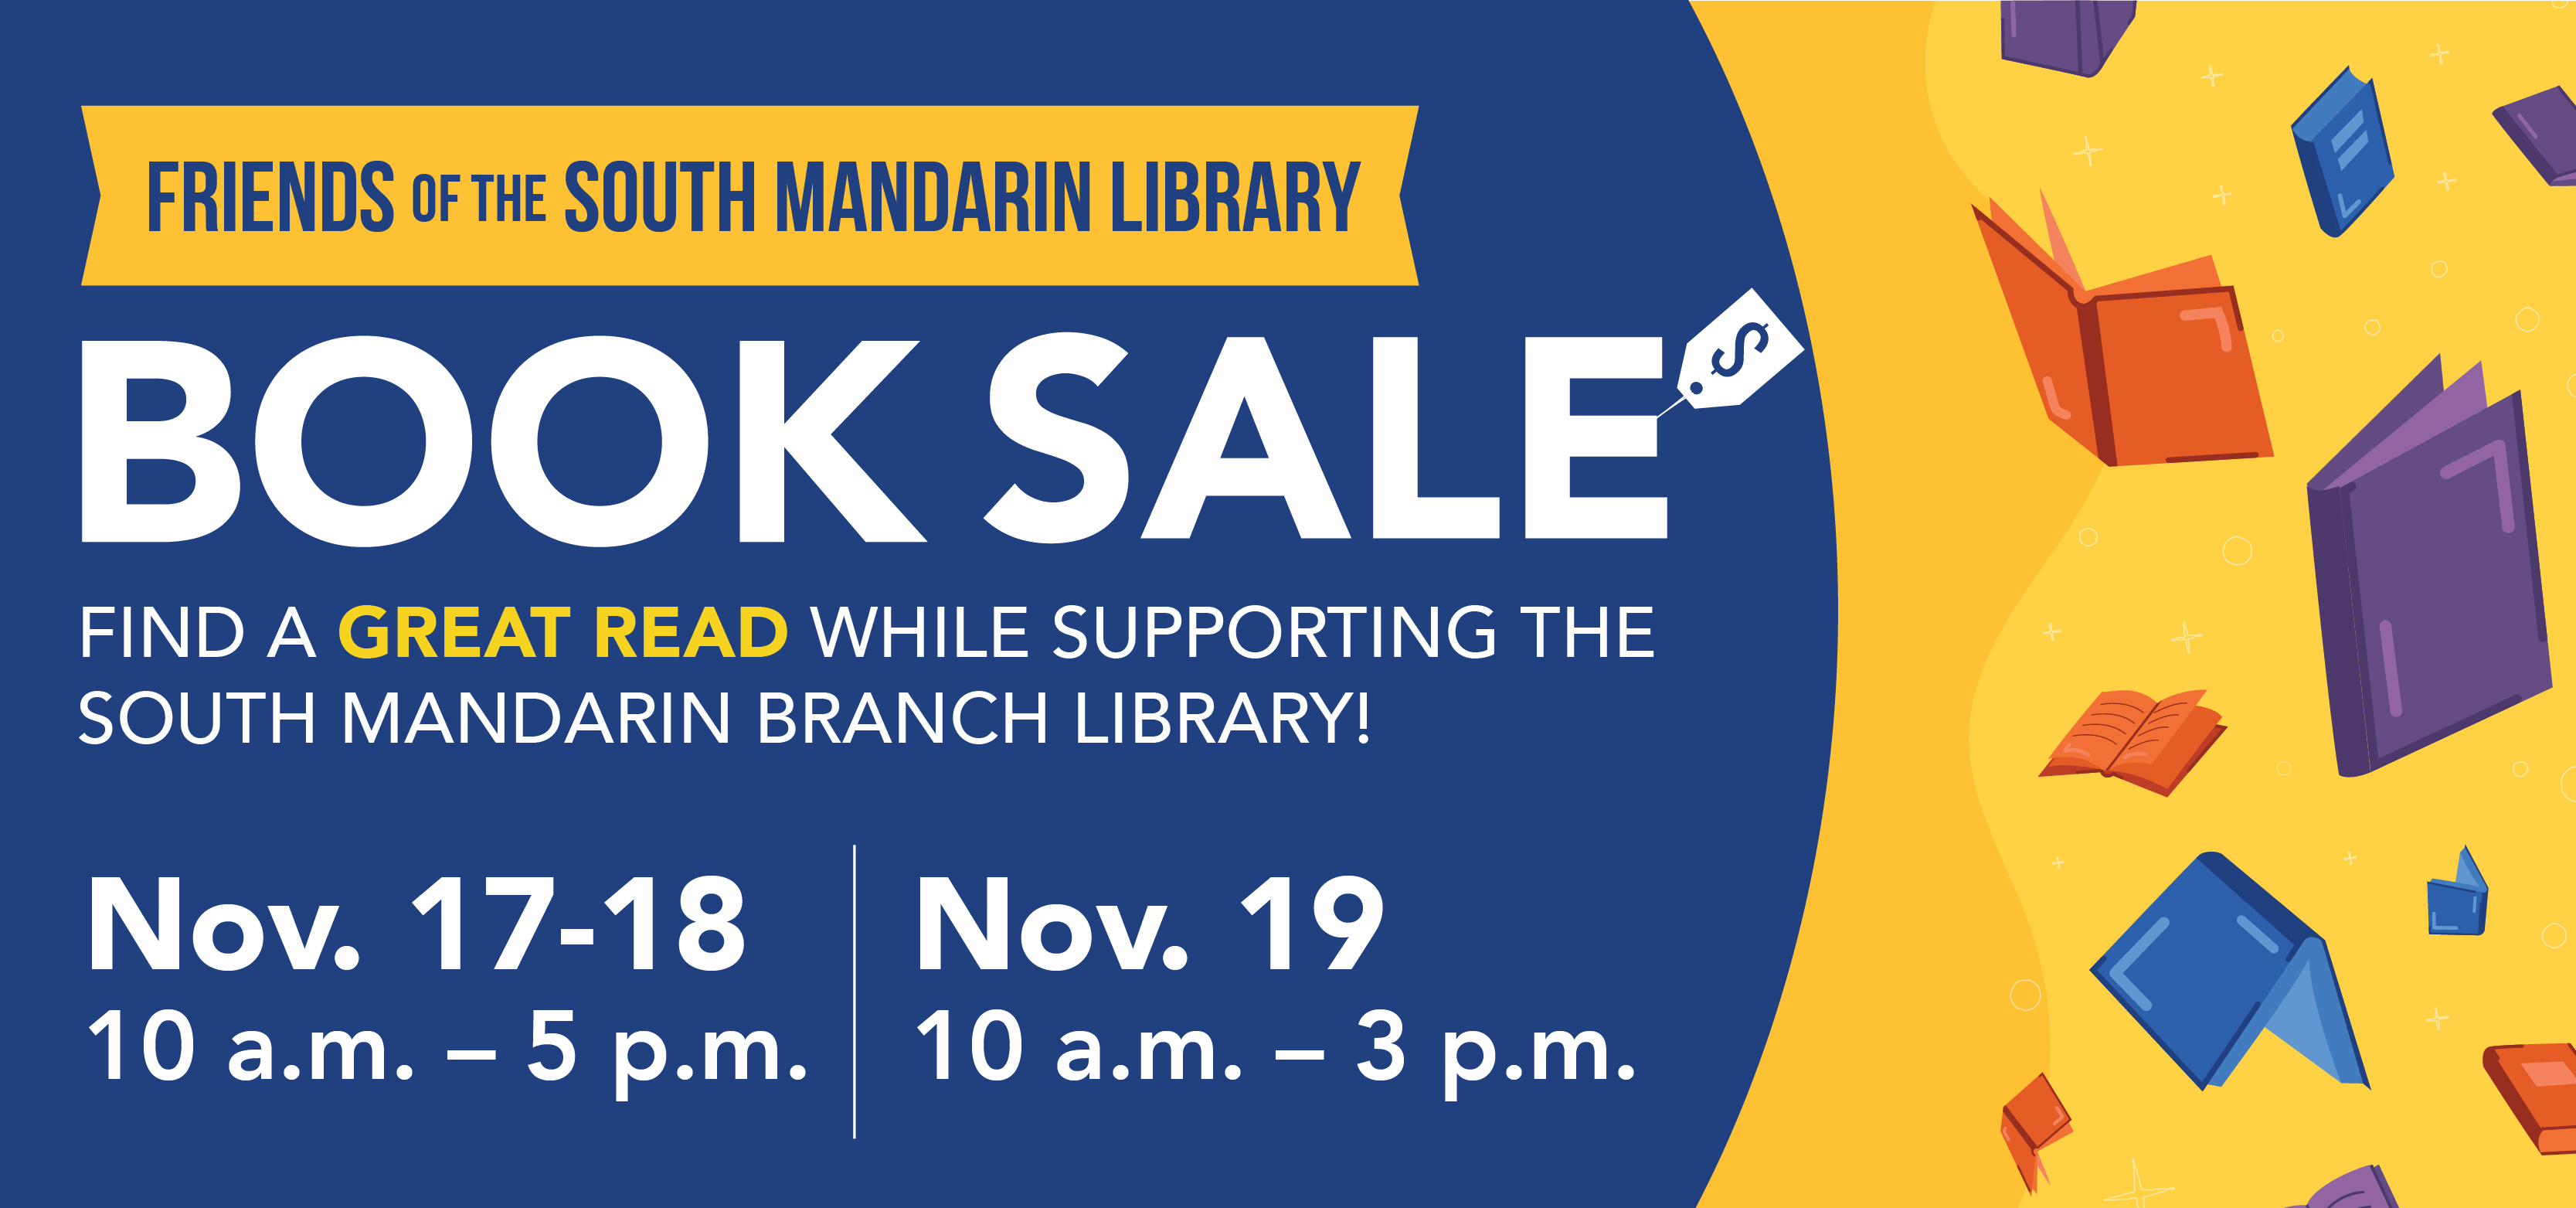 Used Book Sale At South Mandarin Branch